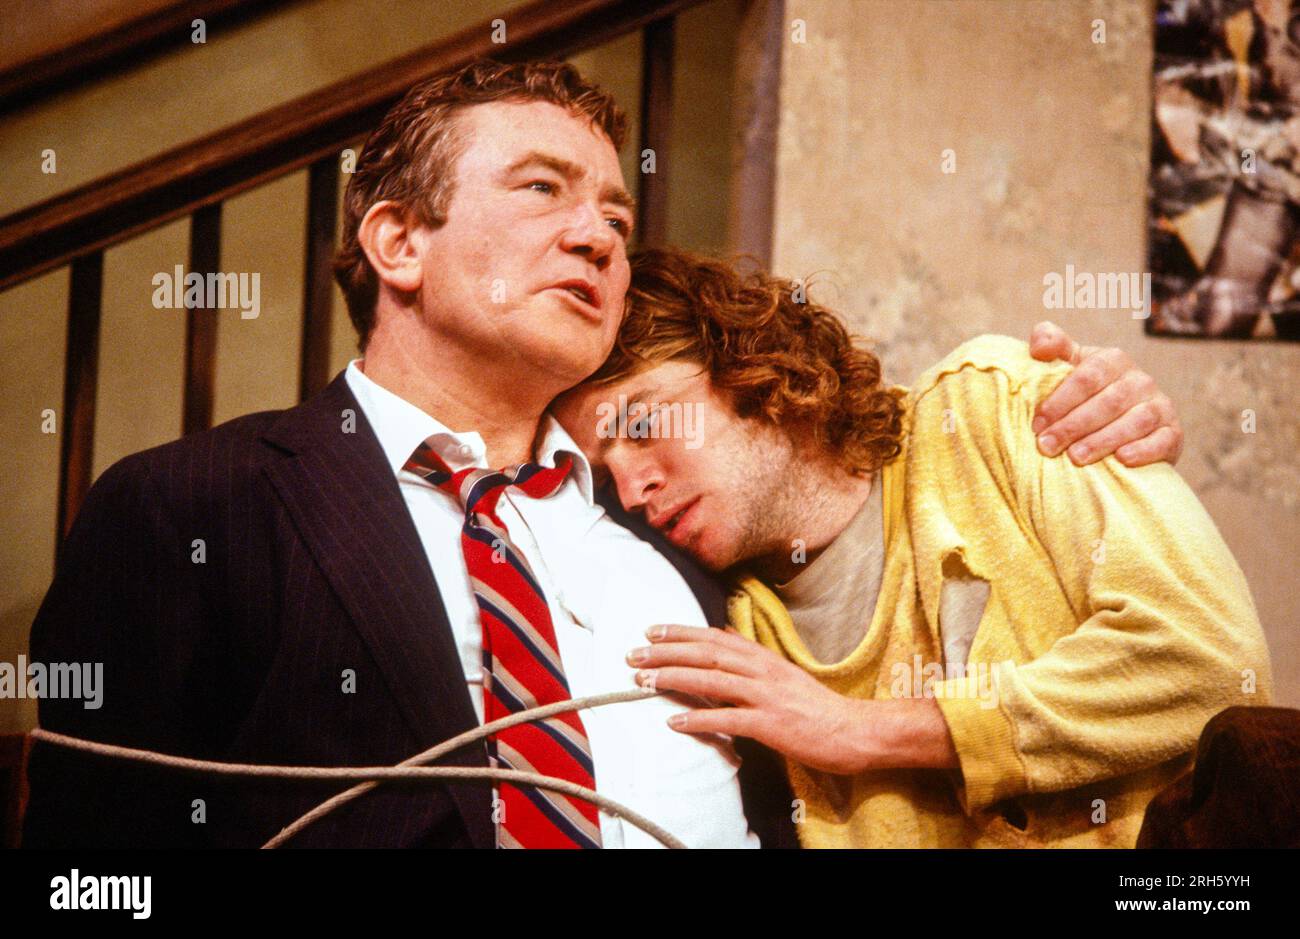 l-r: Albert Finney (Harold), Kevin Anderson (Philip) in ORPHANS by Lyle Kessler at the Hampstead Theatre, London NW3  11/03/1986  a co-production with Steppenwolf Theatre Company  transferred to the Apollo Theatre, W1 from 09/04/1986  music: Pat Metheney & Lyle Maye  set & lighting design: Kevin Ridden  costumes: Nan Cibula  director: Gary Sinise Stock Photo